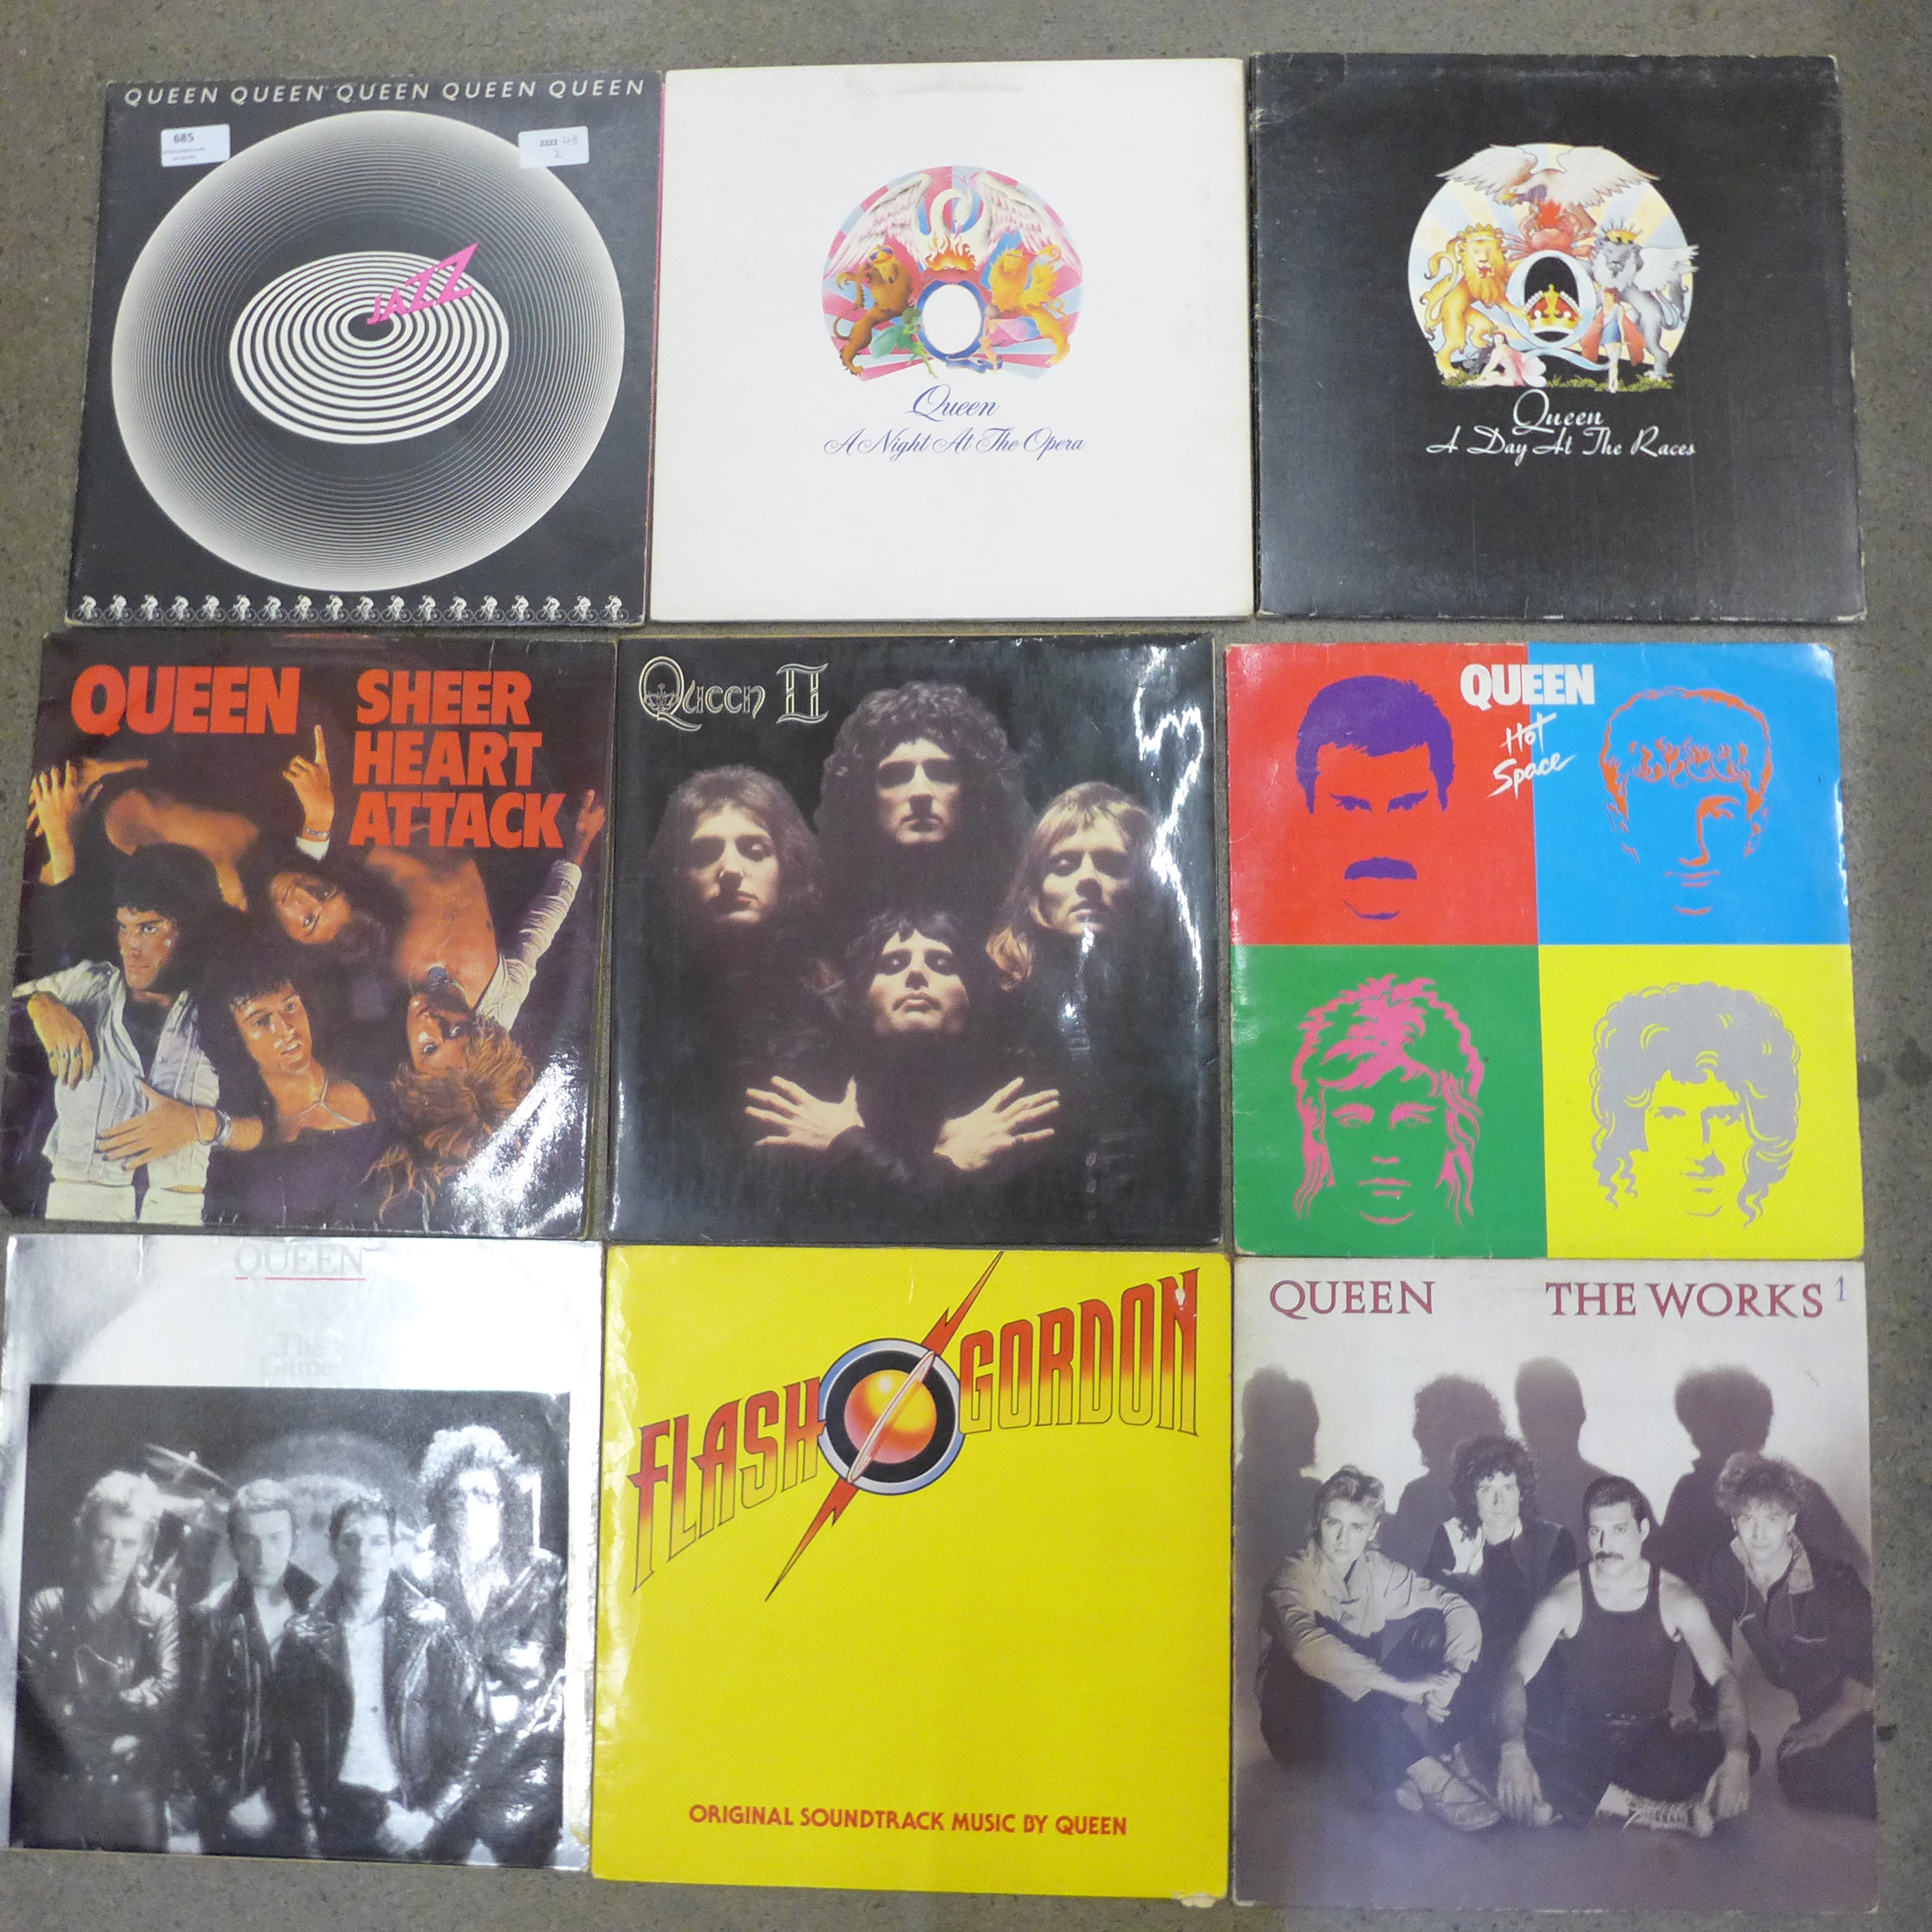 A collection of twelve Queen LP records and a 12" single